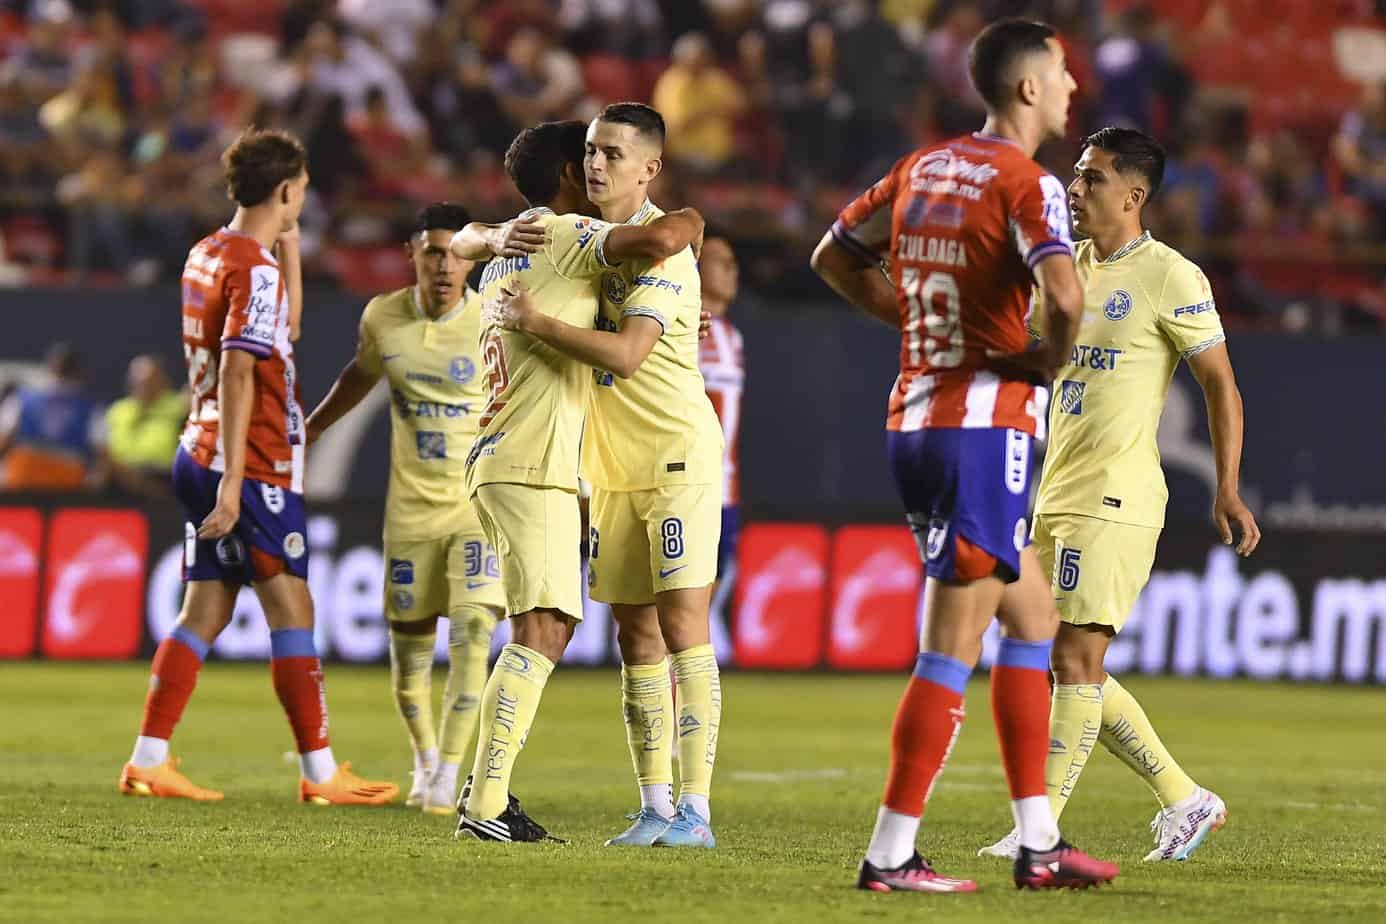 San Luis vs. Club América Preview and Free Pick